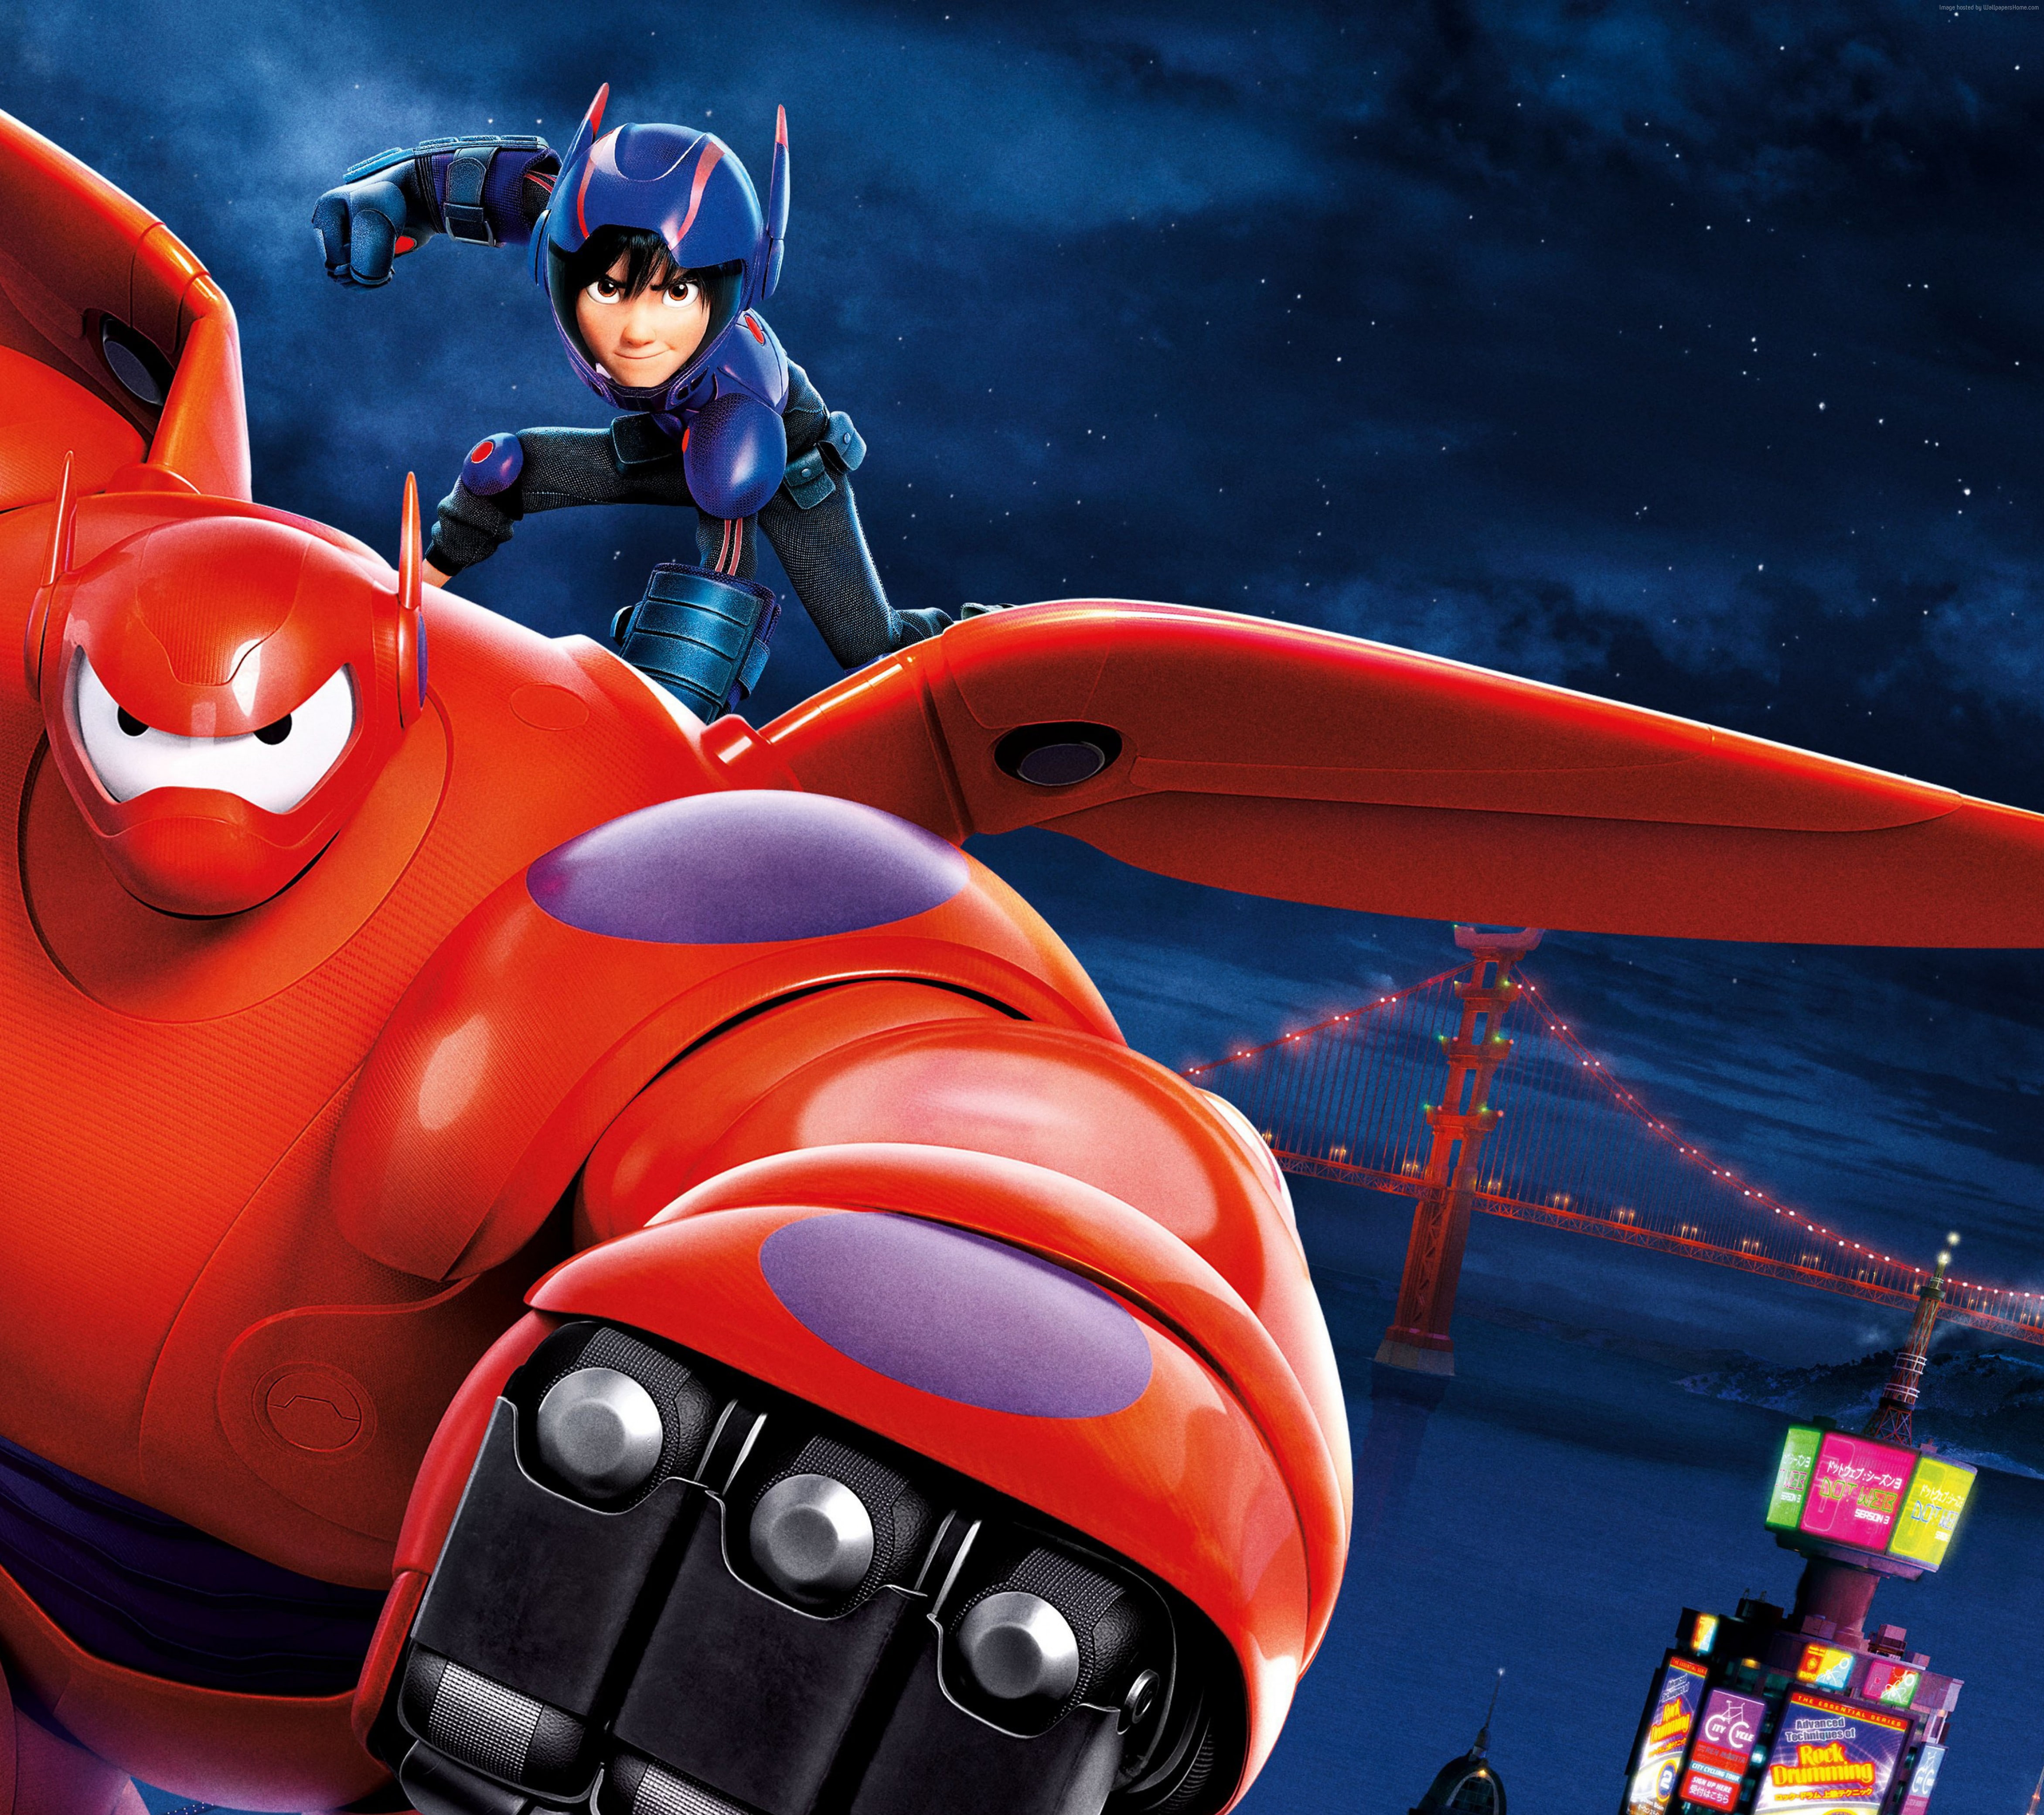 HD, review, 3D, Big Hero 6, flight, Baymax, Best Animation Movies of 2015